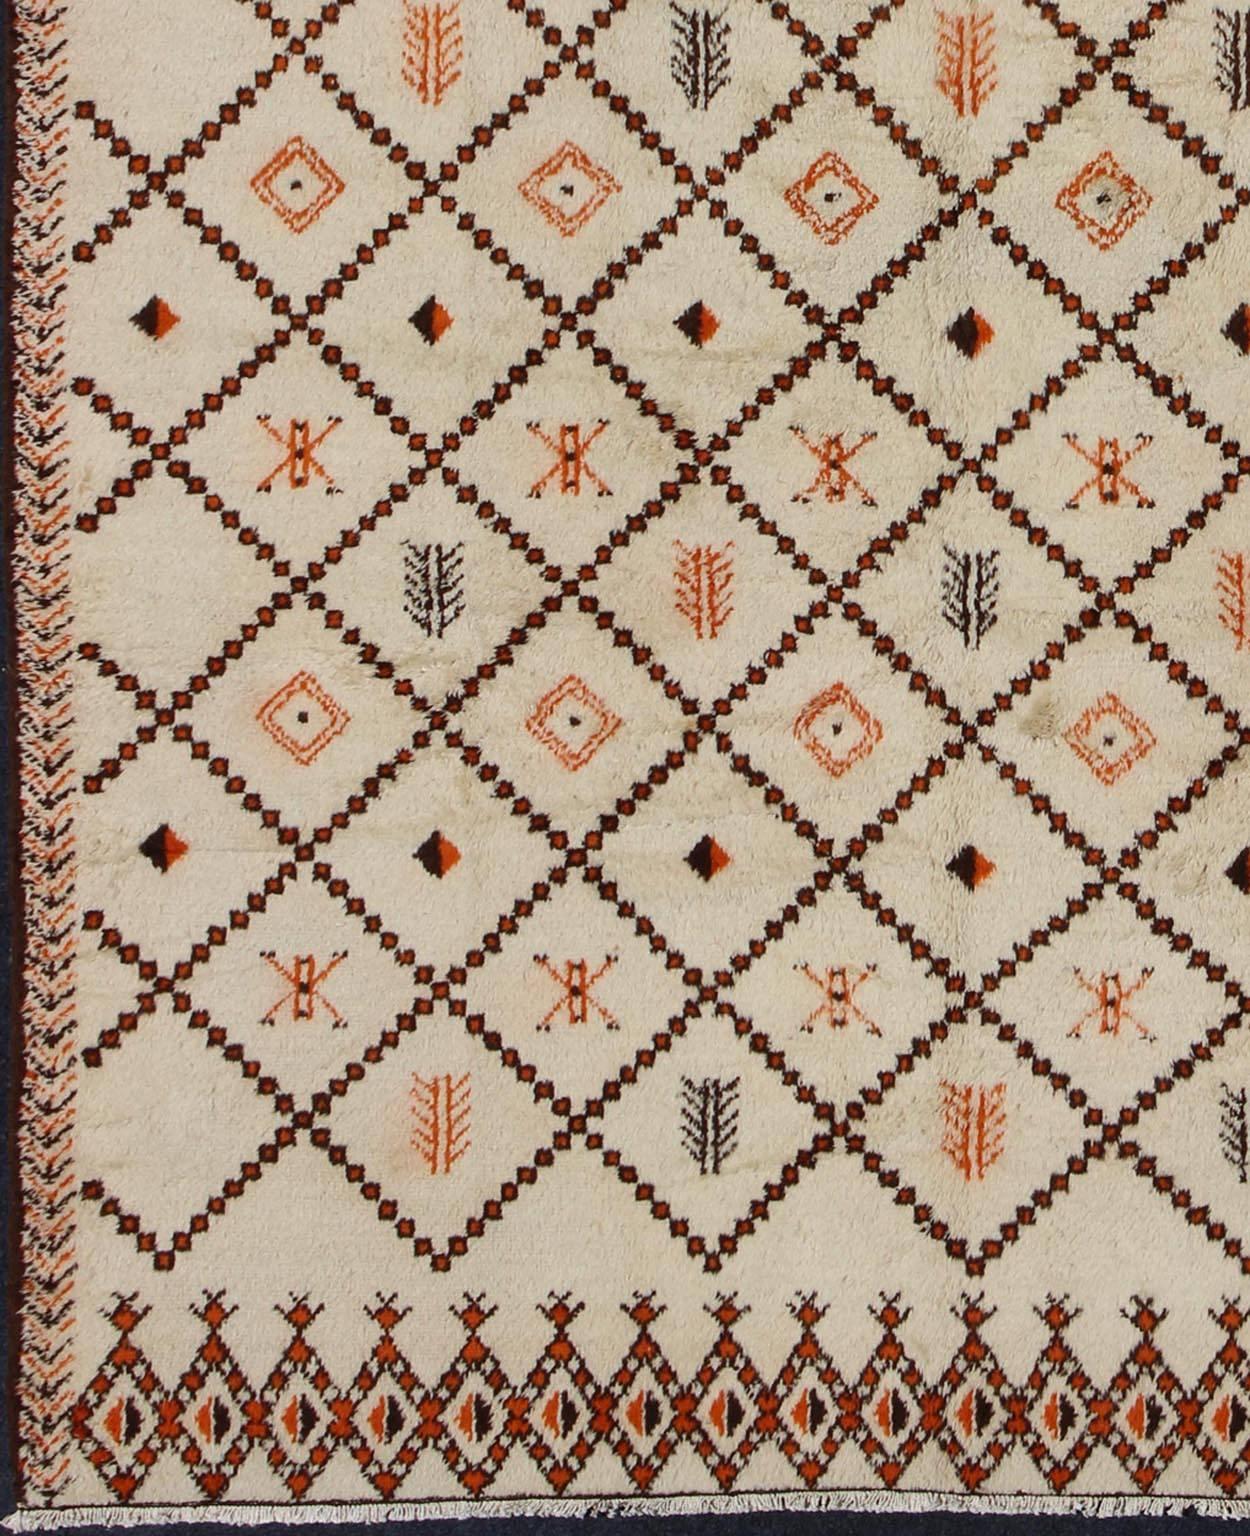 Large Vintage Moroccan Rug in Diamond Design with Ivory and Brown Outlines
This Moroccan rug has an all-over geometric diamond pattern  in Ivory Background with brown and orange outlines. The colors include ivory, orange, black and charcoal.